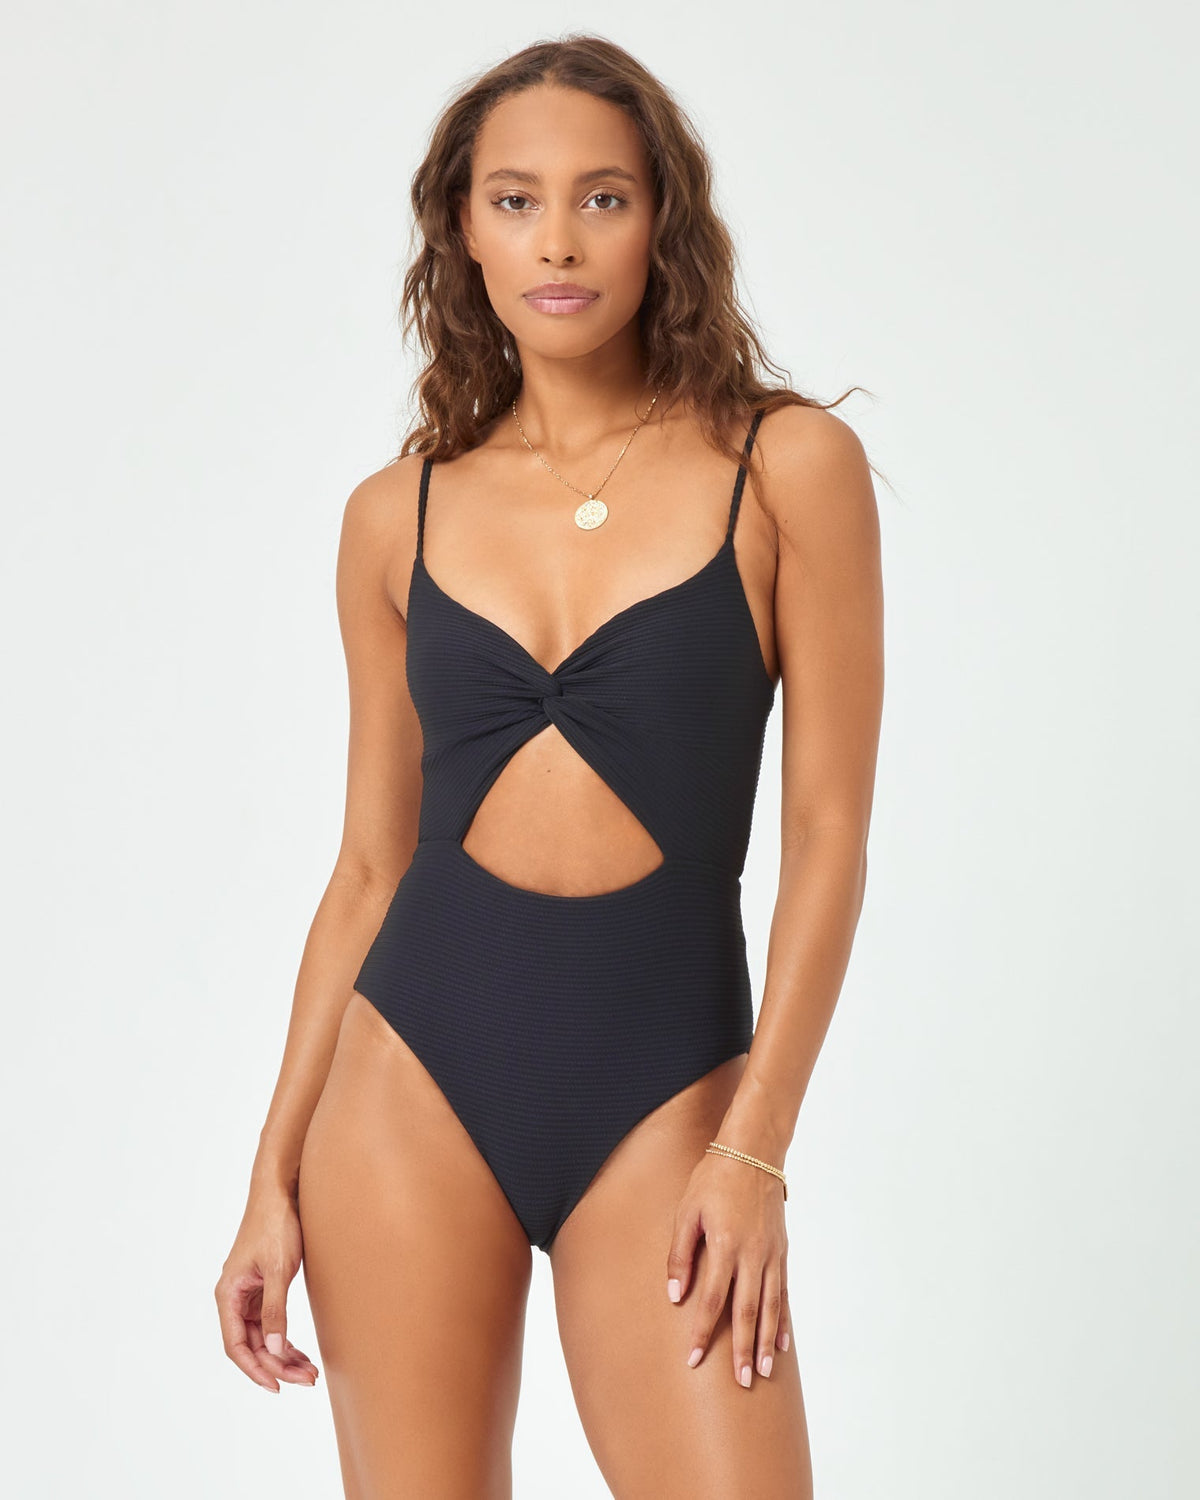 Eco Chic Repreve® Kyslee One Piece Swimsuit - Black Black | Model: Natalie (size: S) | Hover